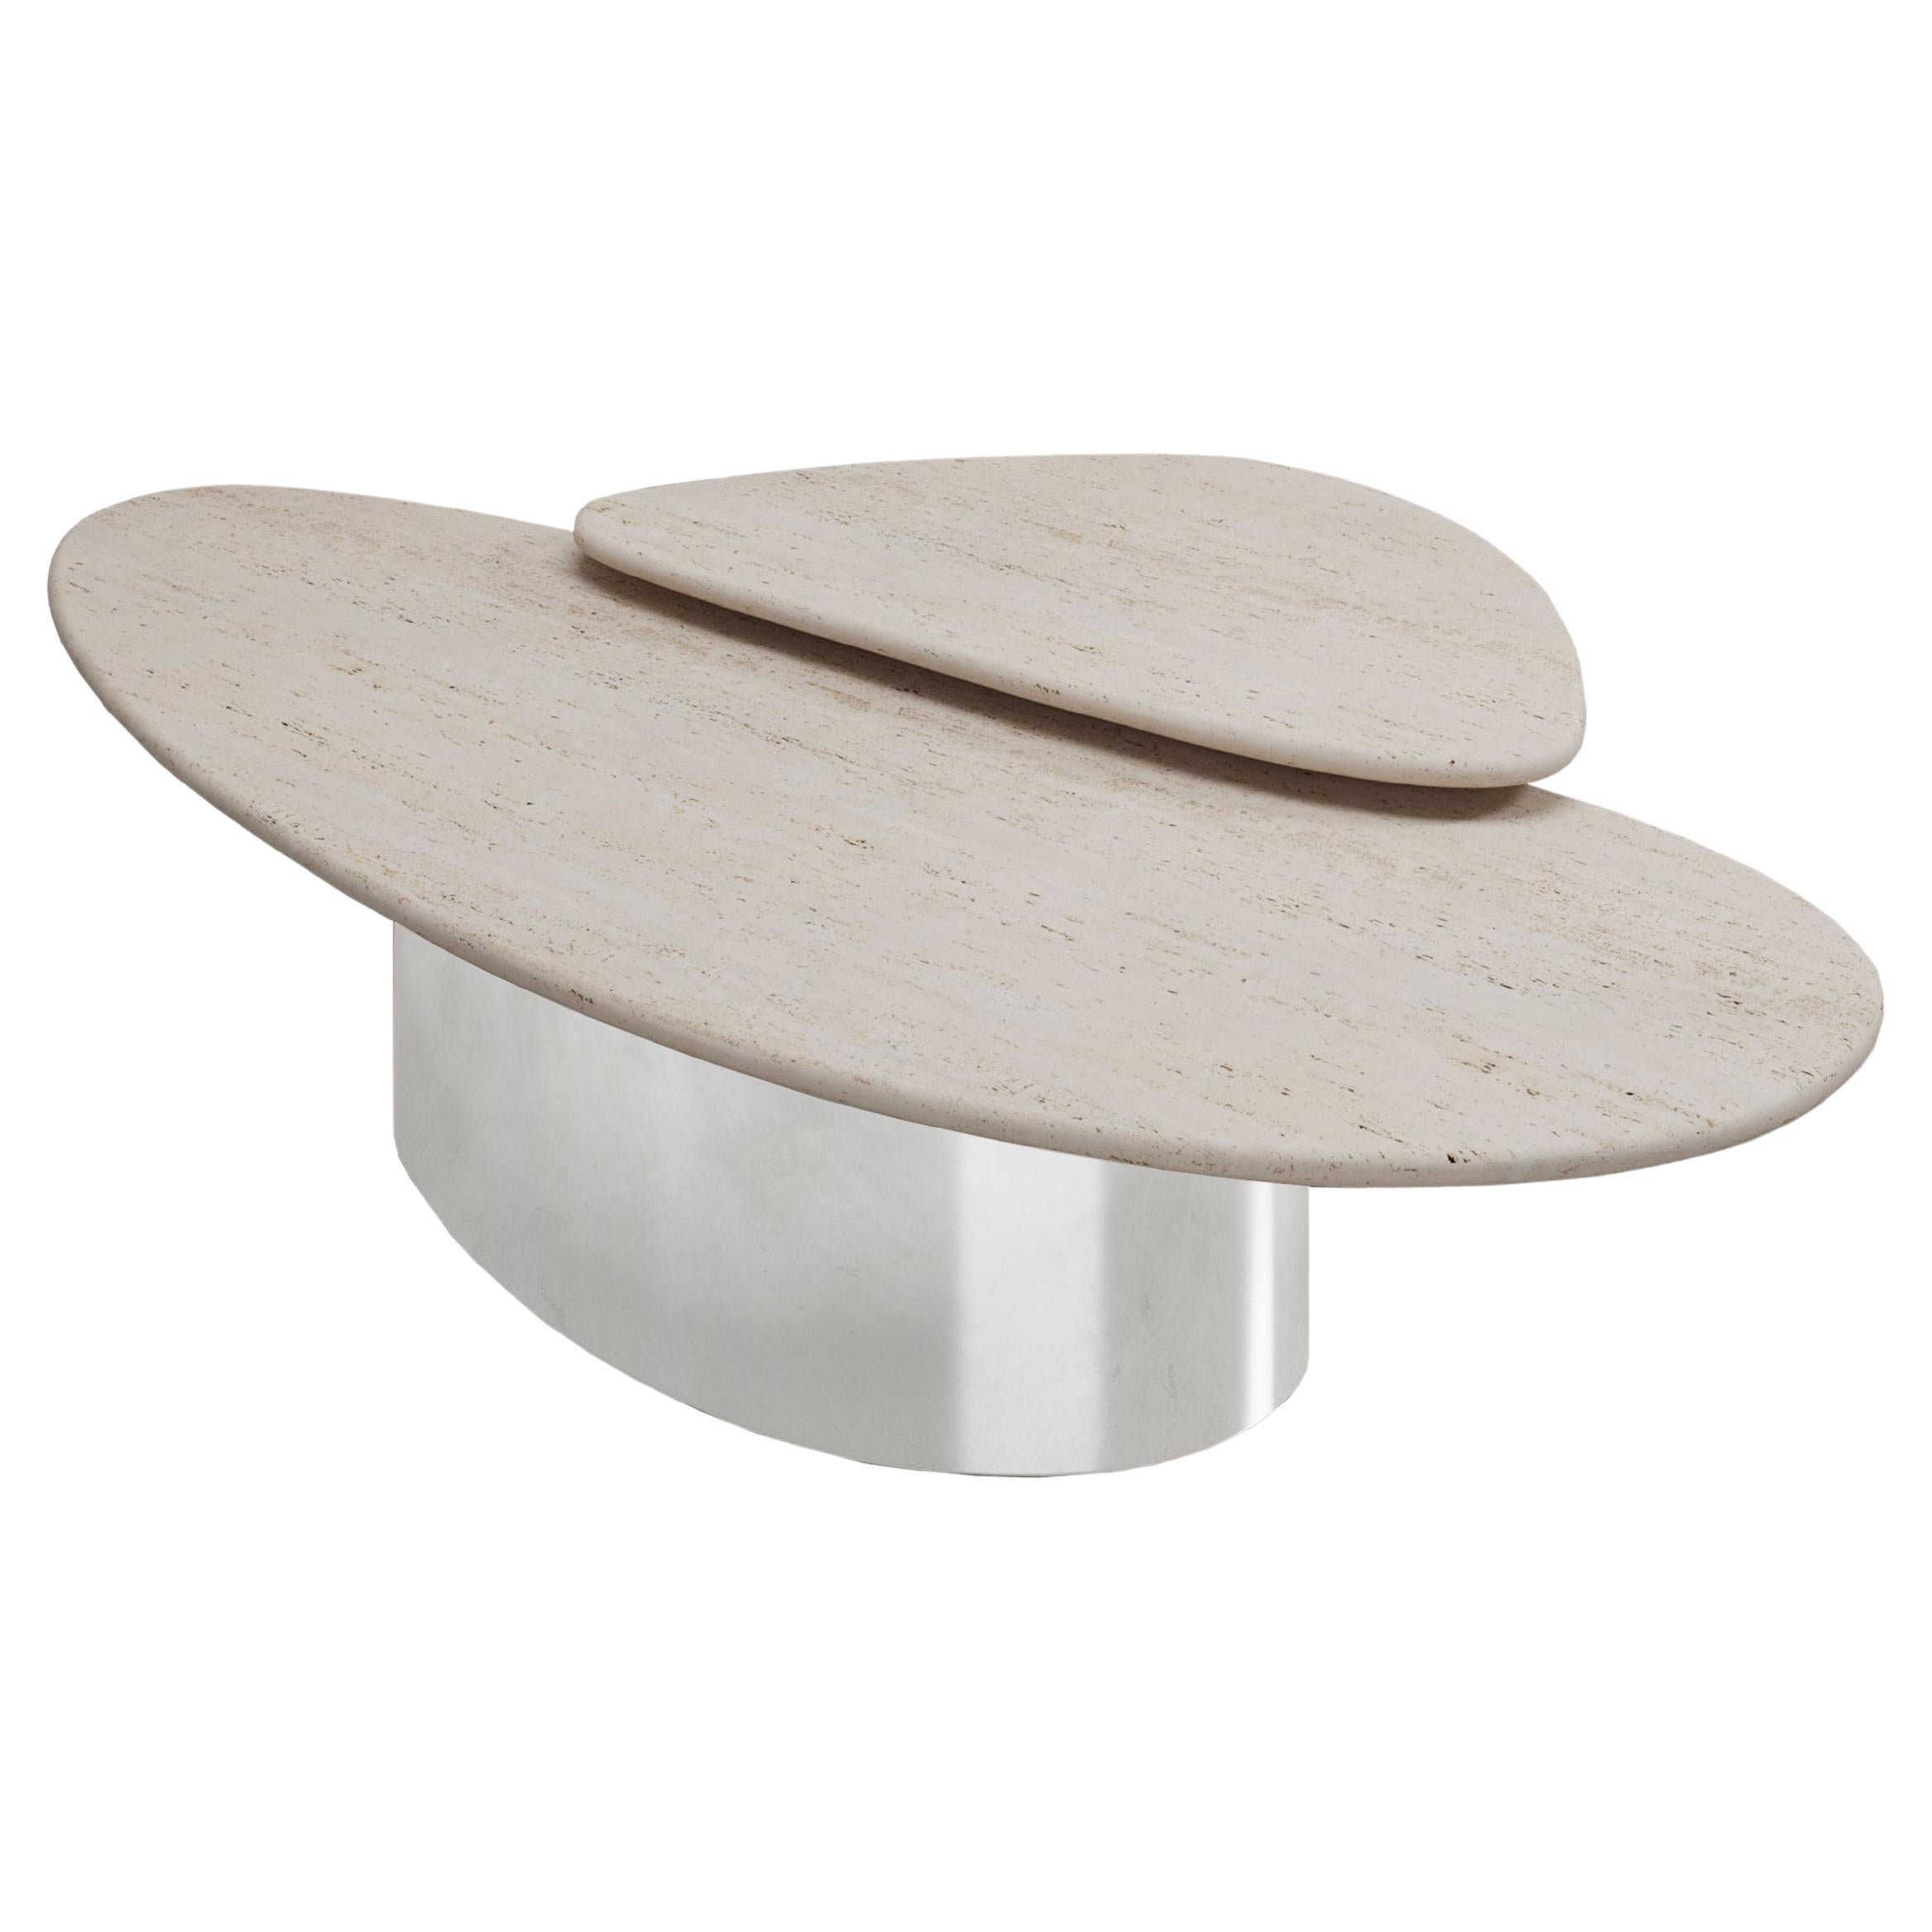 Egeo cofee table by Reverso Studio, set of 2 For Sale